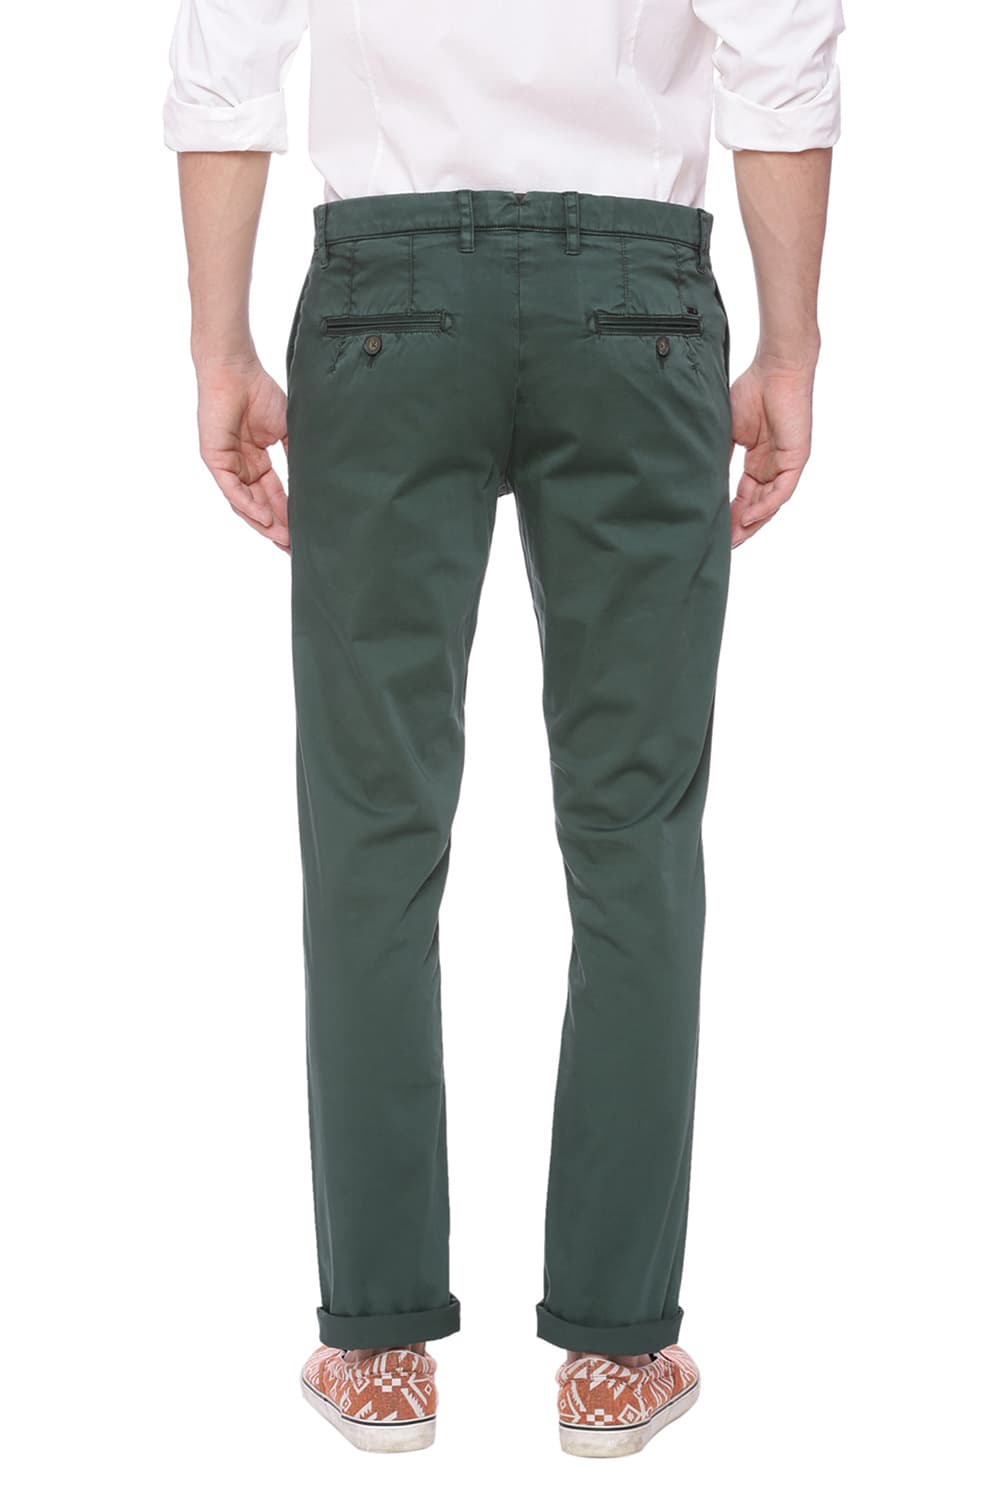 BASICS TAPERED FIT SATIN STRETCH TROUSER